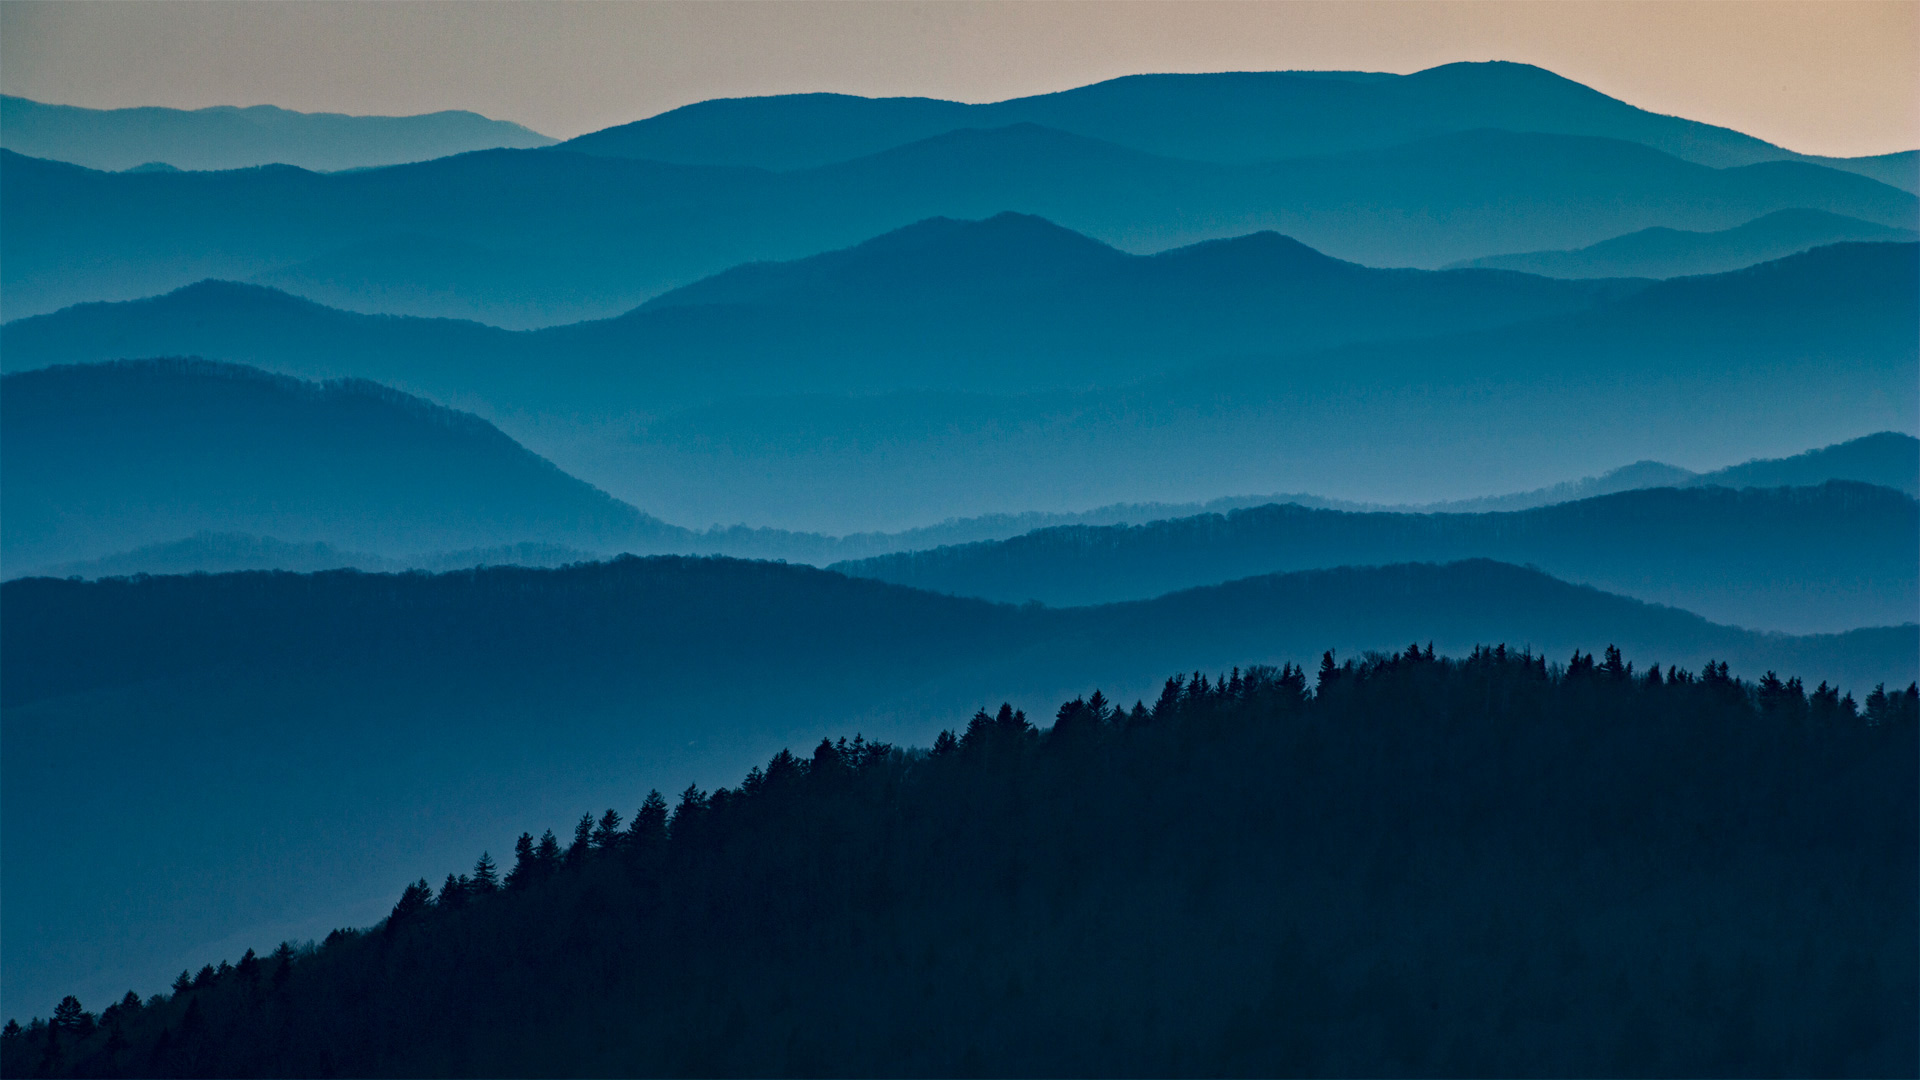 Great Smoky Mountains National Park, Tennessee - Tony Barber/Getty Images)